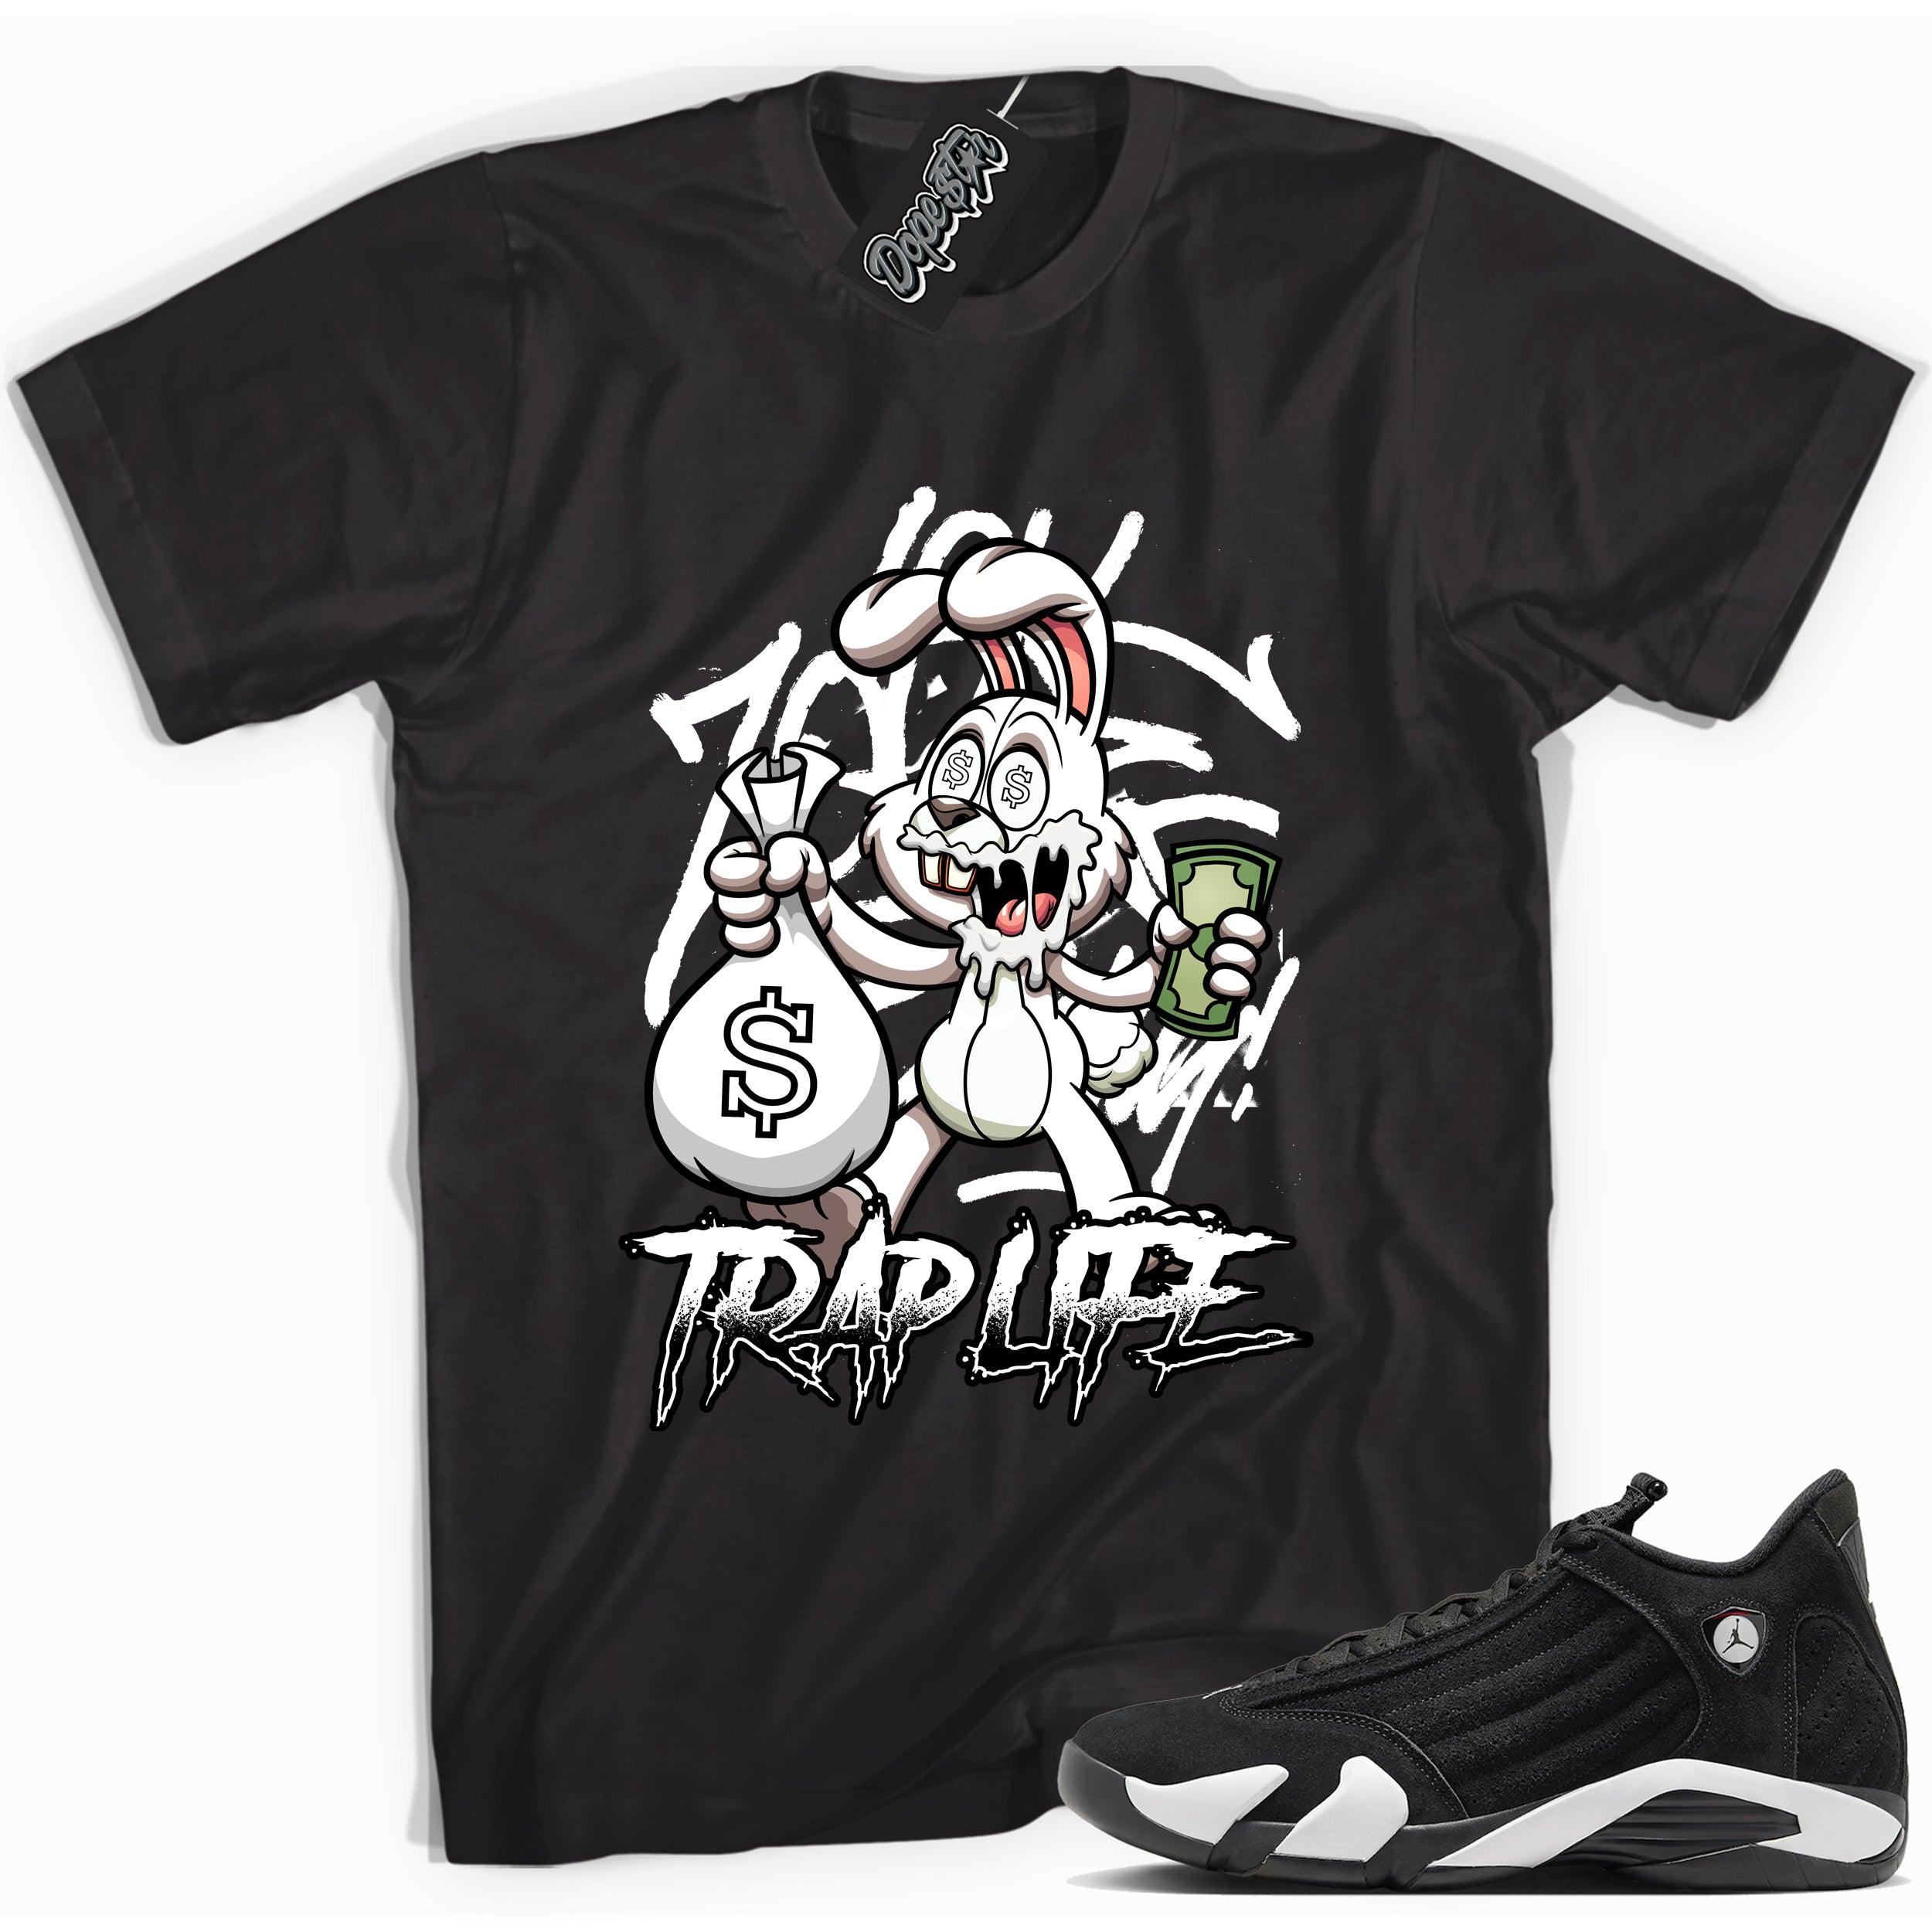 Cool Black graphic tee with “ Trap Life ” print, that perfectly matches Air Jordan 14 Black & White sneakers 